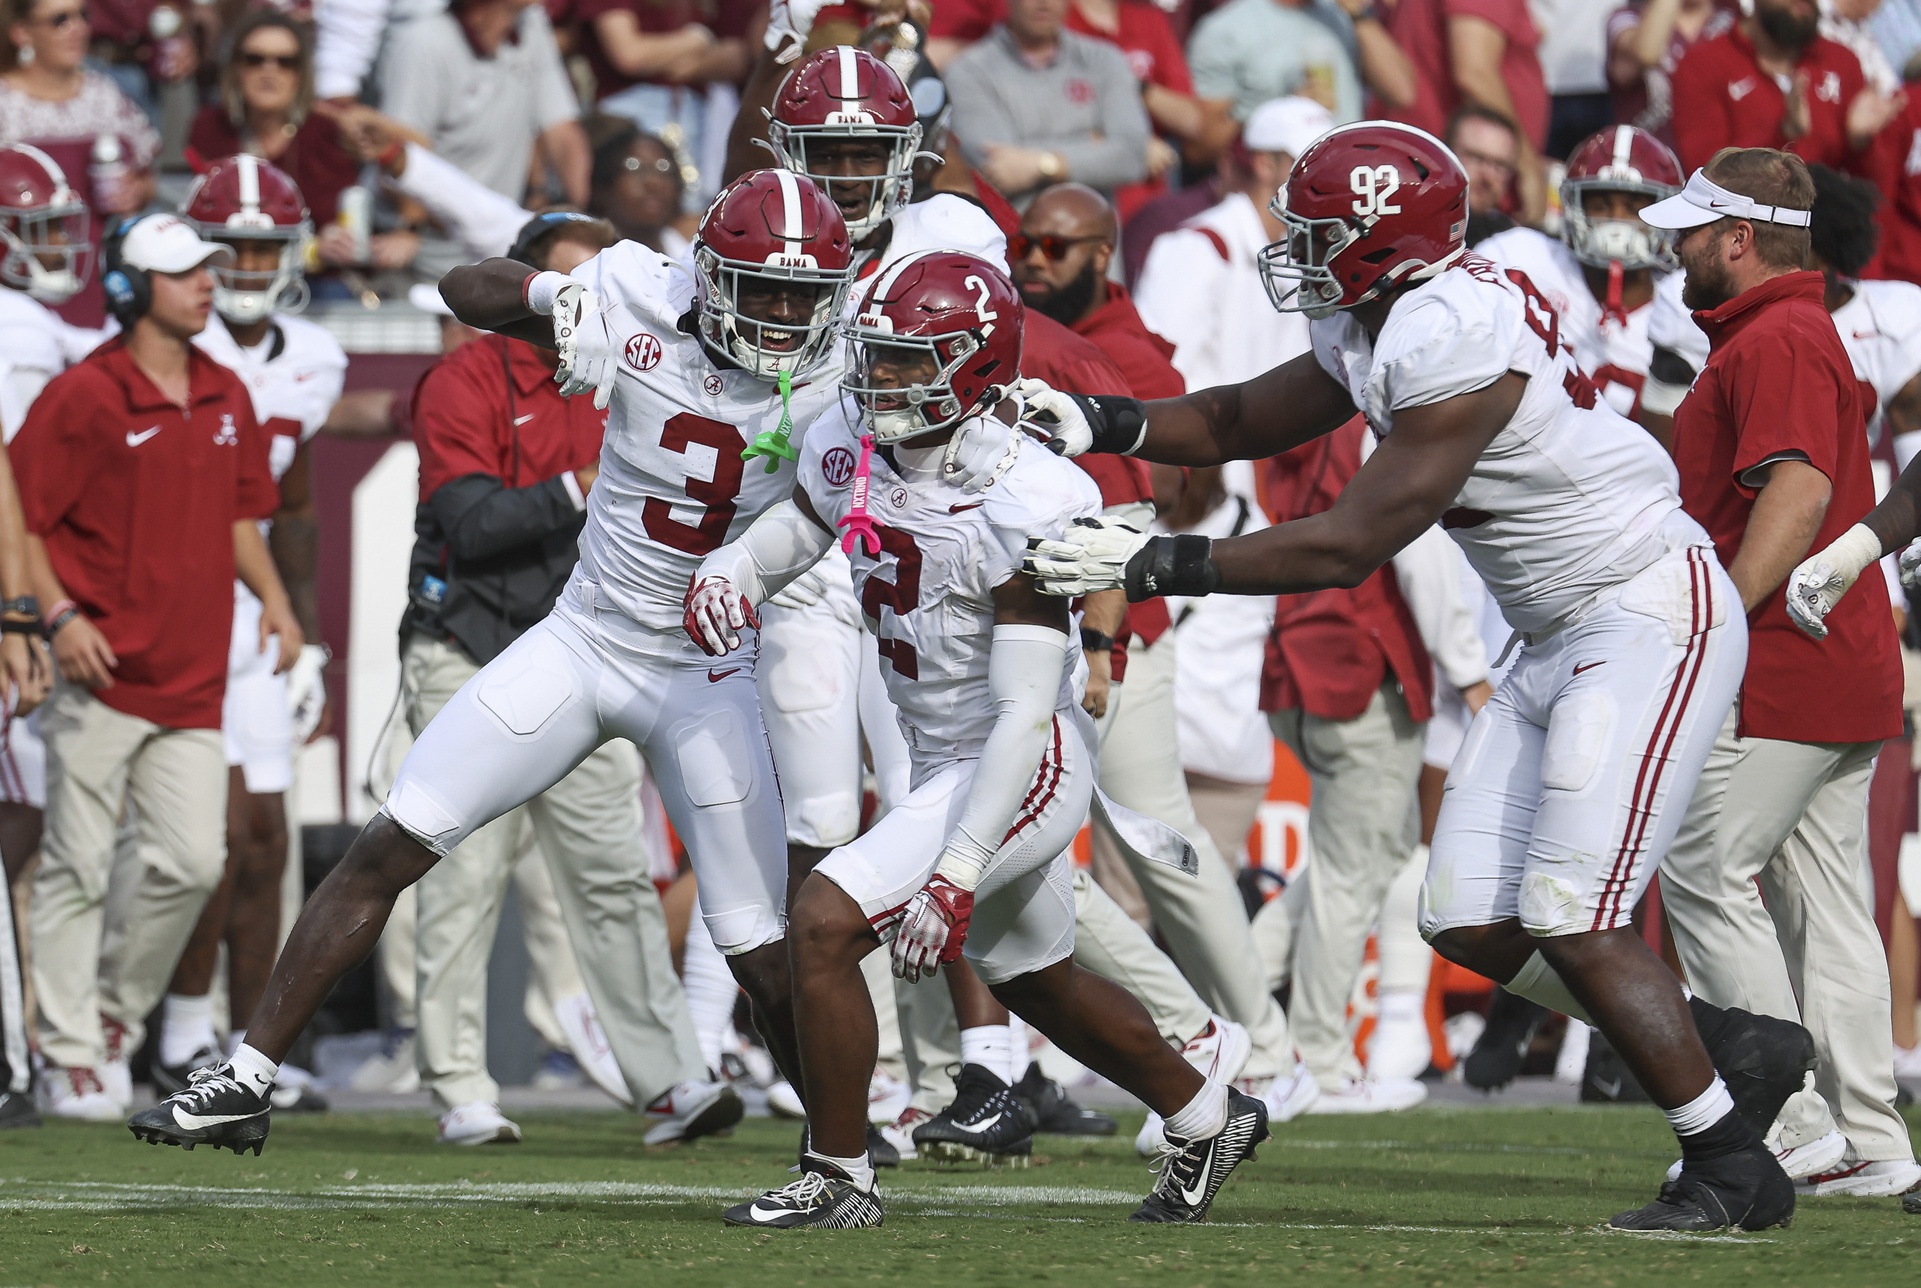 11 Alabama Takes On Arkansas in Potential Road Trap Game